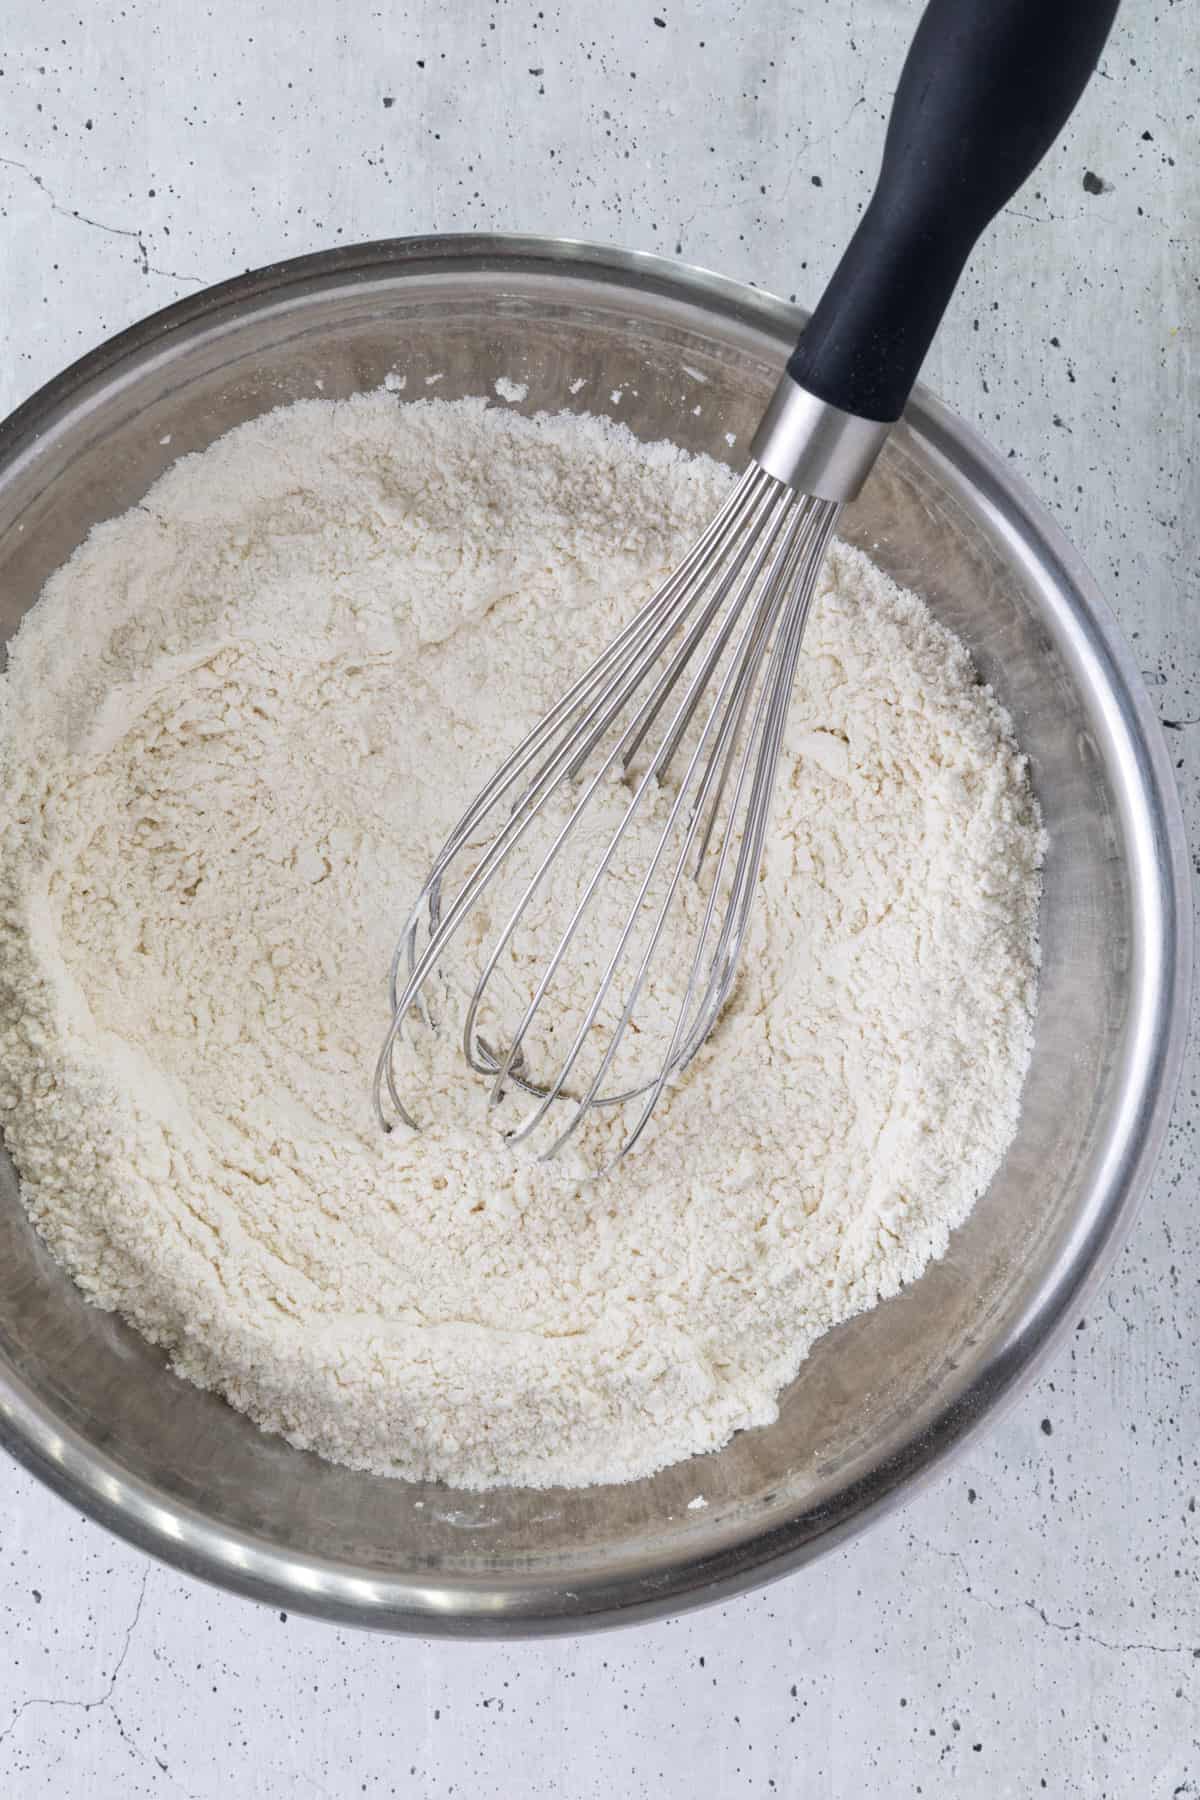 Dry ingredients in a mixing bowl with a large whisk.